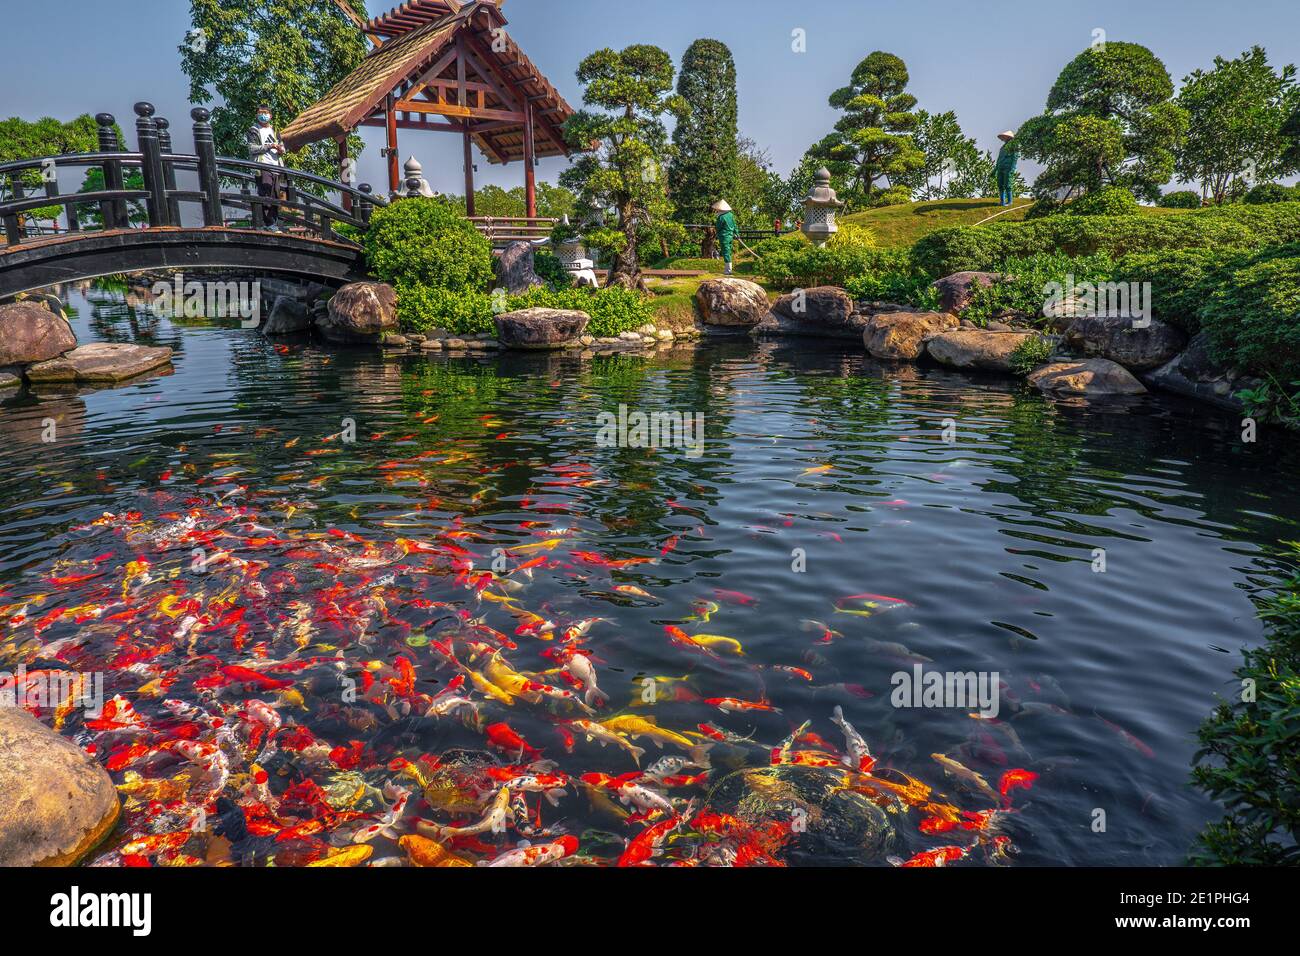 Colorful Japanese Koi Carp fish in a lovely pond in a garden Stock Photo -  Alamy